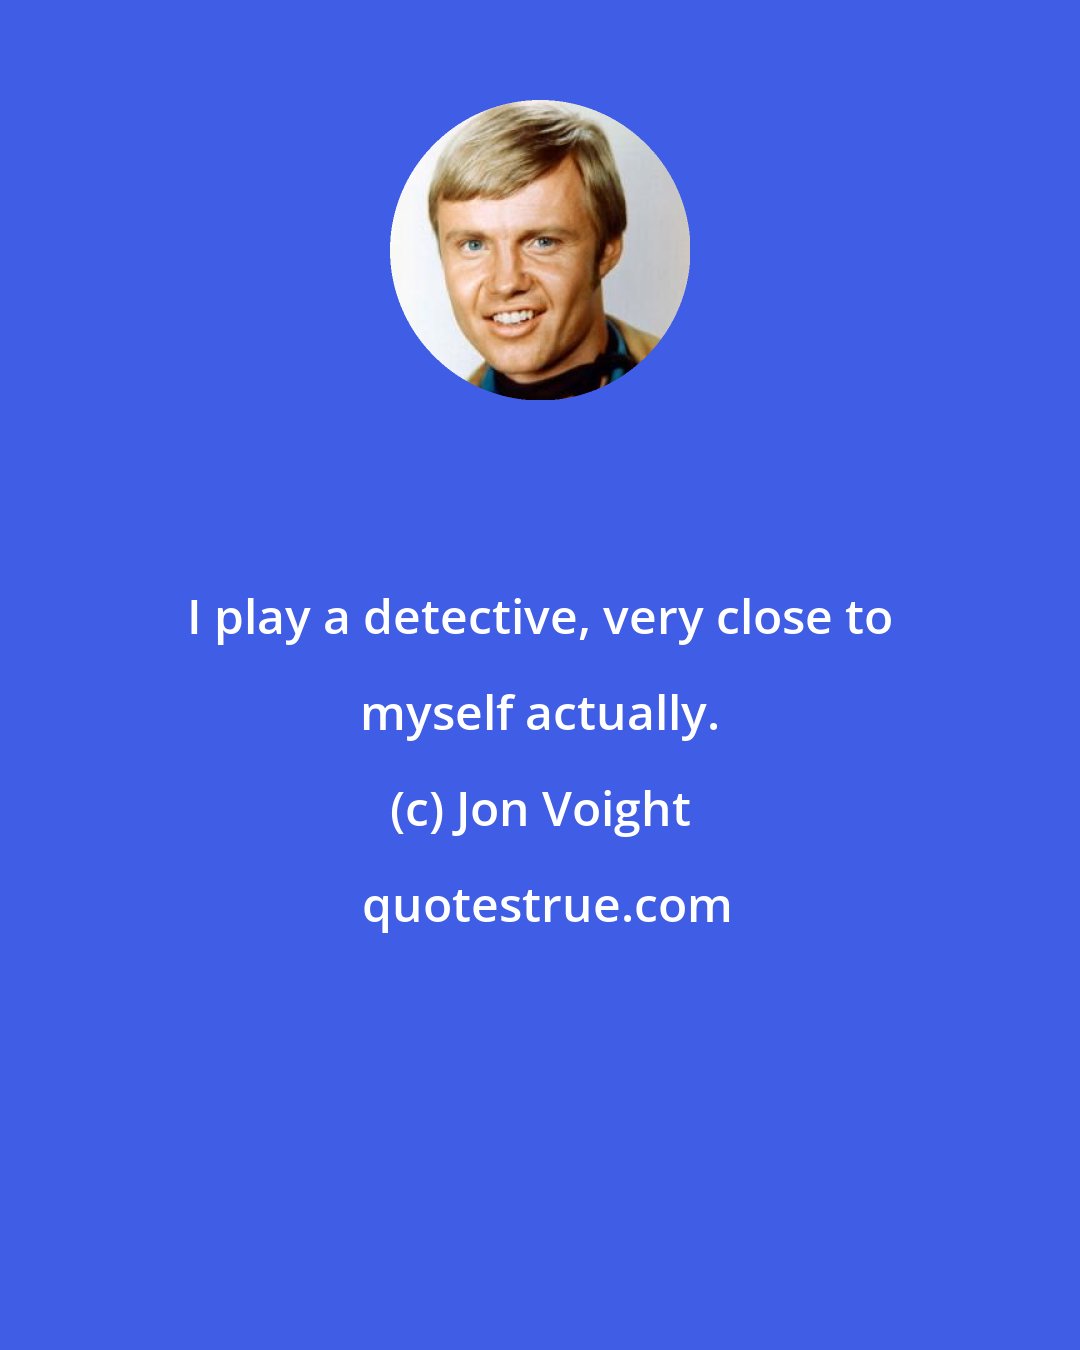 Jon Voight: I play a detective, very close to myself actually.